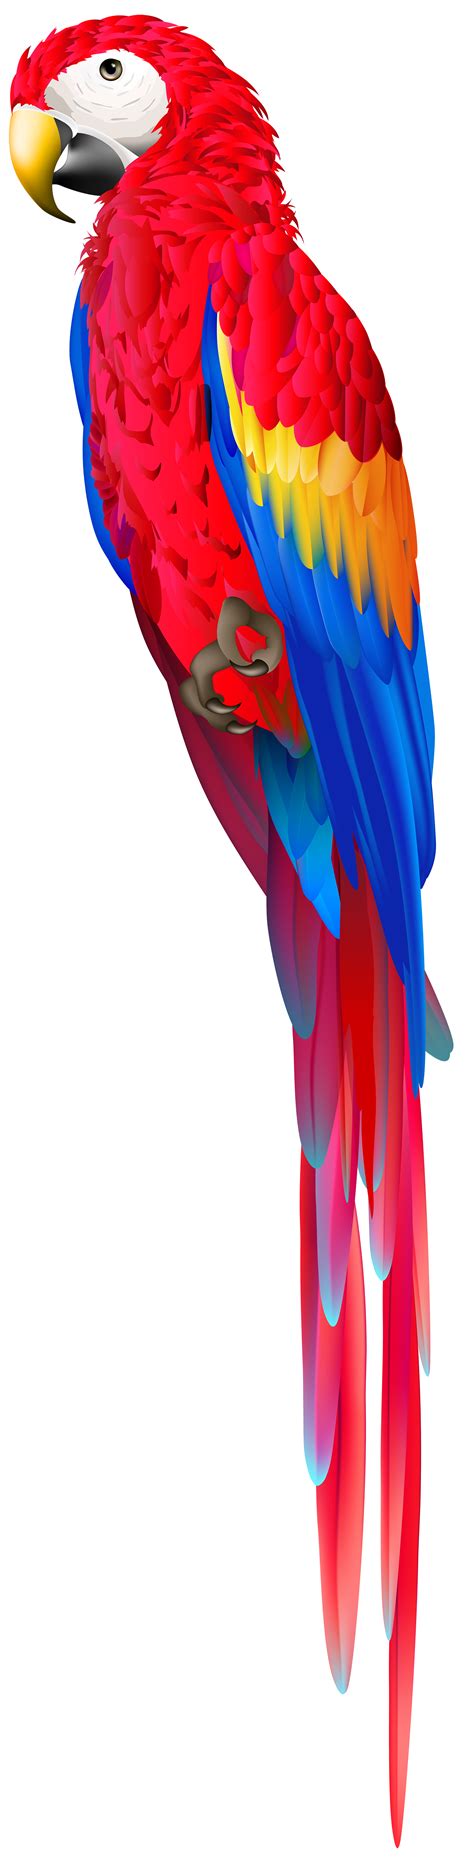 red parrot png png image collection